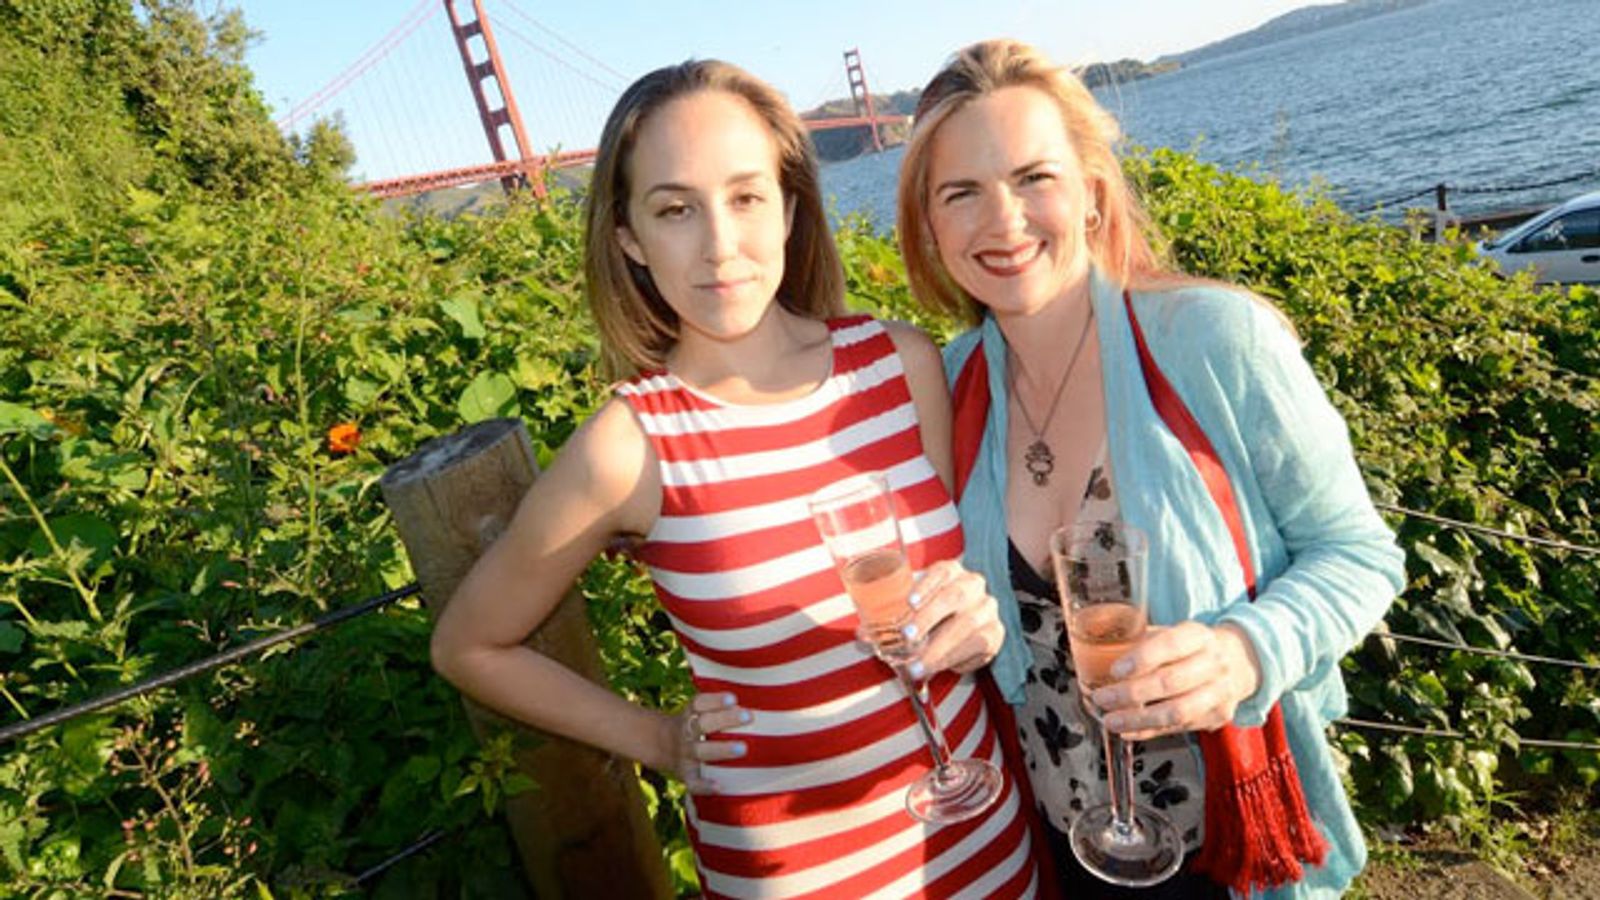 SF Armory Hosts 'Devoured' Dinner Parties for Singles and Couples